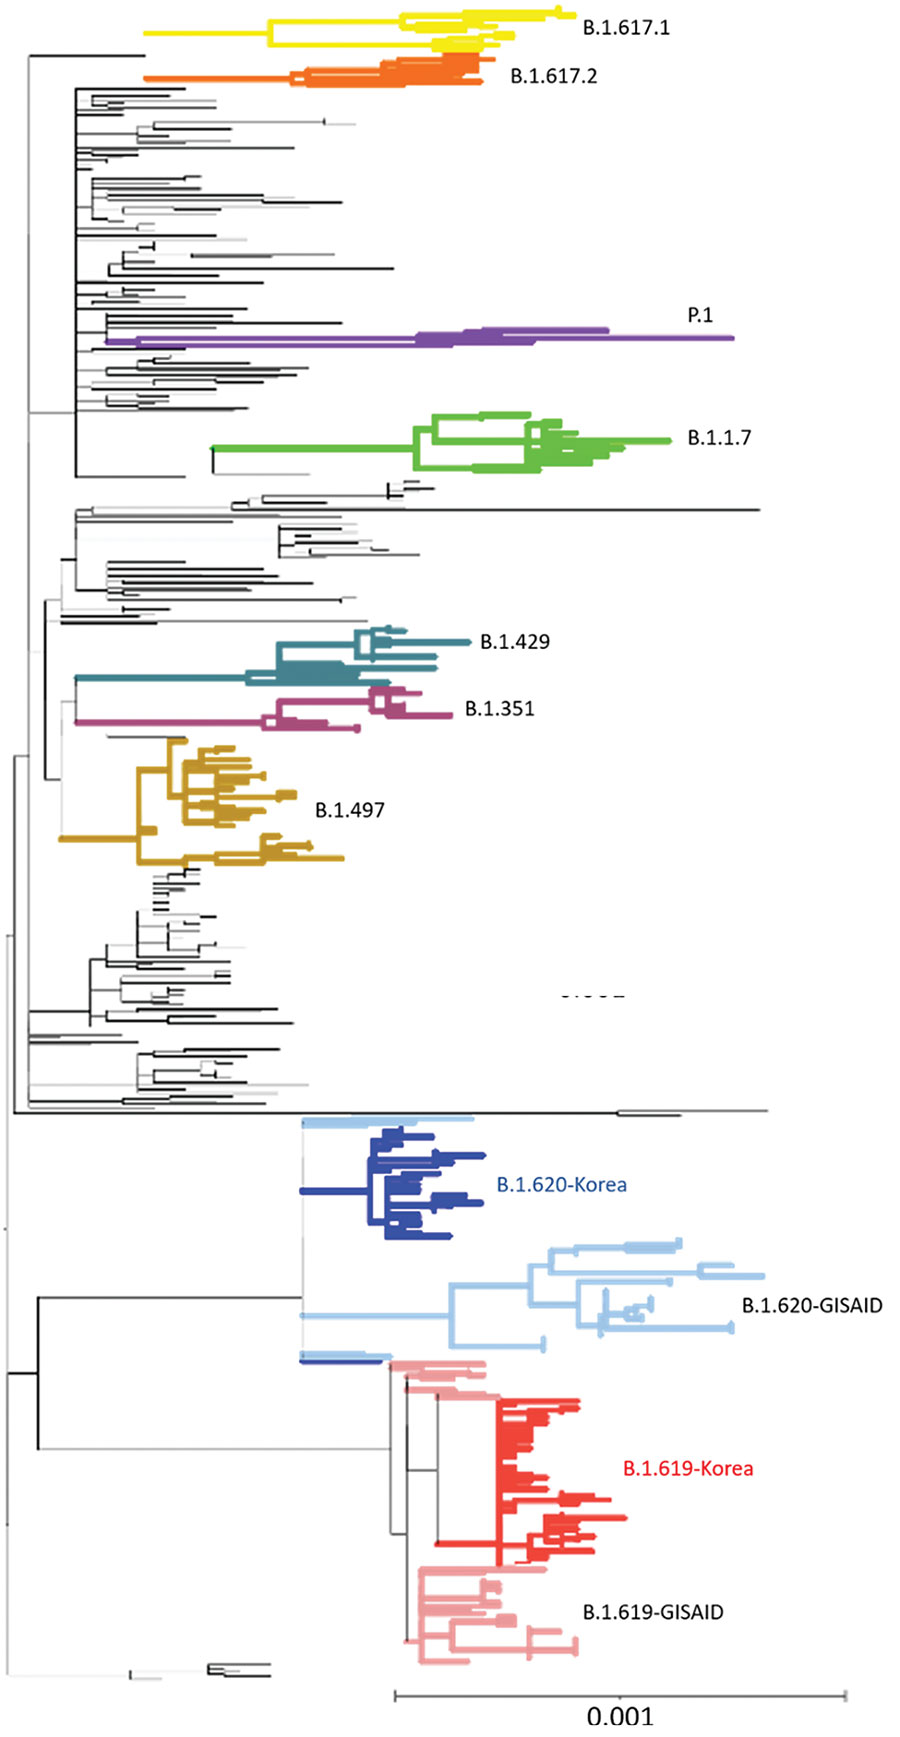 Phylogenetic analysis of severe acute respiratory syndrome coronavirus 2 sequences, South Korea. A total of 457 sequences were used to construct the tree, including 37 sequences of B.1.619 lineage and 36 sequences of B.1.620 lineage from GISAID (https://www.gisaid.org). Each sequence was aligned to the reference sequence (Wuhan-Hu-1, GenBank accession no. NC_045512) using Geneious Prime software (https://www.geneious.com) and then manually trimmed to equal lengths. A maximum-likelihood phylogenetic tree was reconstructed using FastTree version 2.1.9 (http://www.microbesonline.org/fasttree), under the general time reversible plus gamma nucleotide substitution model; the phylogenetic tree was visualized using iTOL (https://itol.embl.de). Four variants of concern (B.1.1.7, B.1.351, P.1, and B.1.617.2), 2 variants of interest (B.1.429 and B.1.617.1), and B.1.497, which were the major lineages of the GH clade in South Korea, are shown. Red indicates South Korea B.1.619 sequences and blue, B.1.620; pink indicates Europe B.1.619 sequences and light blue, B.1.620. Scale bar indicates substitutions per site.